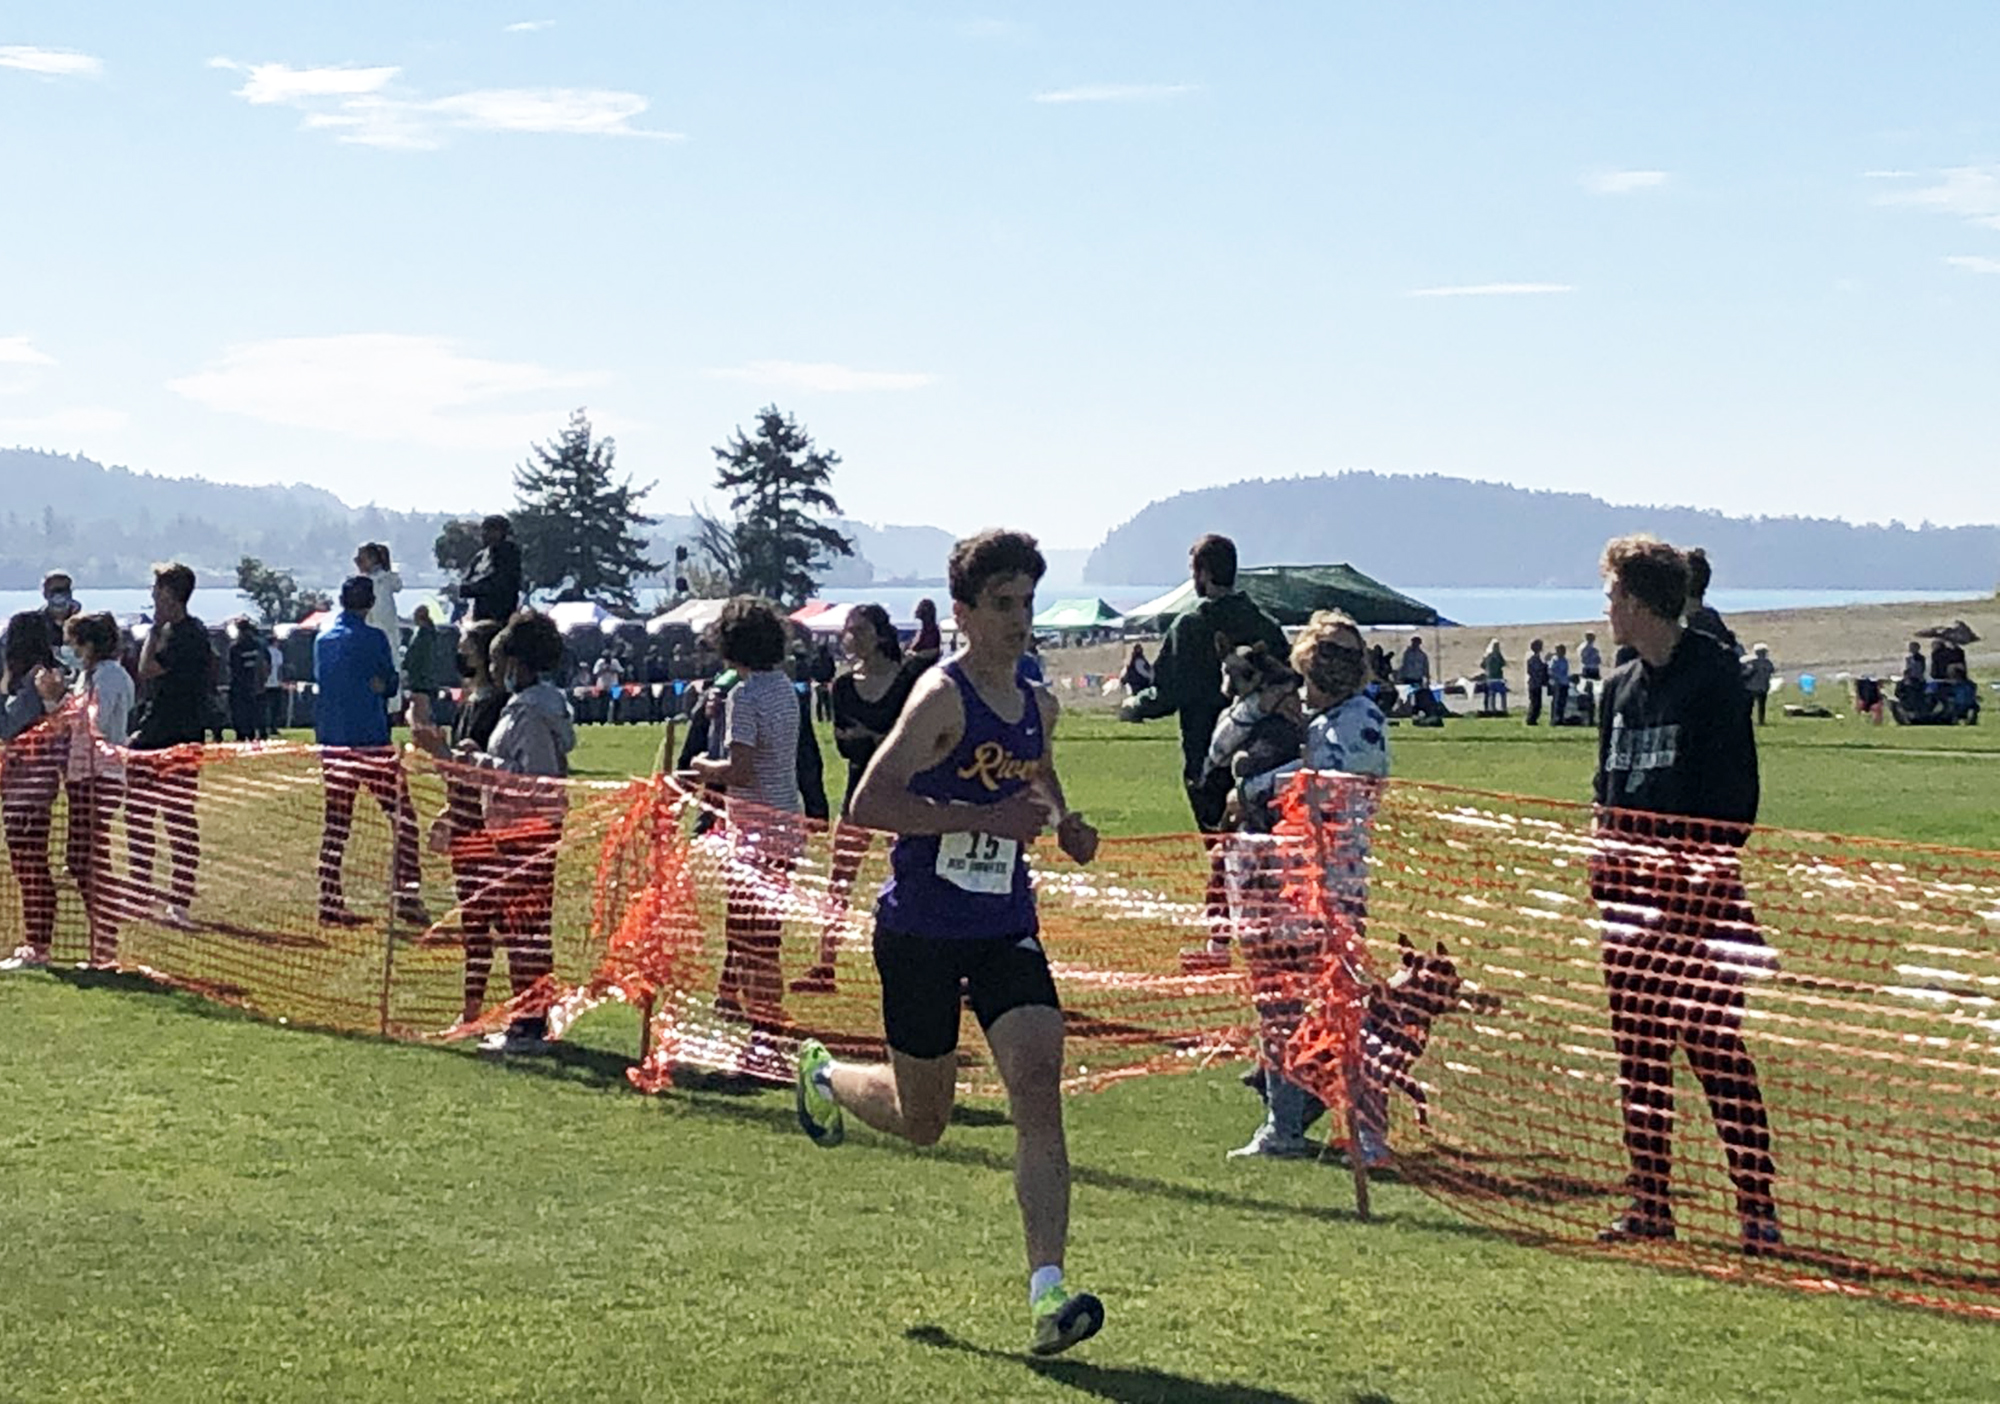 Columbia River's Daniel Barna places fourth in the top division varsity race at the Curtis Invitational on Saturday, Oct. 2, 2021, at University Place. He was the top Washington finisher behind three Jesuit (Ore.) runners. His time was 15 minutes, 43 seconds on the 5,000-meter course near Chambers Bay Golf Course.